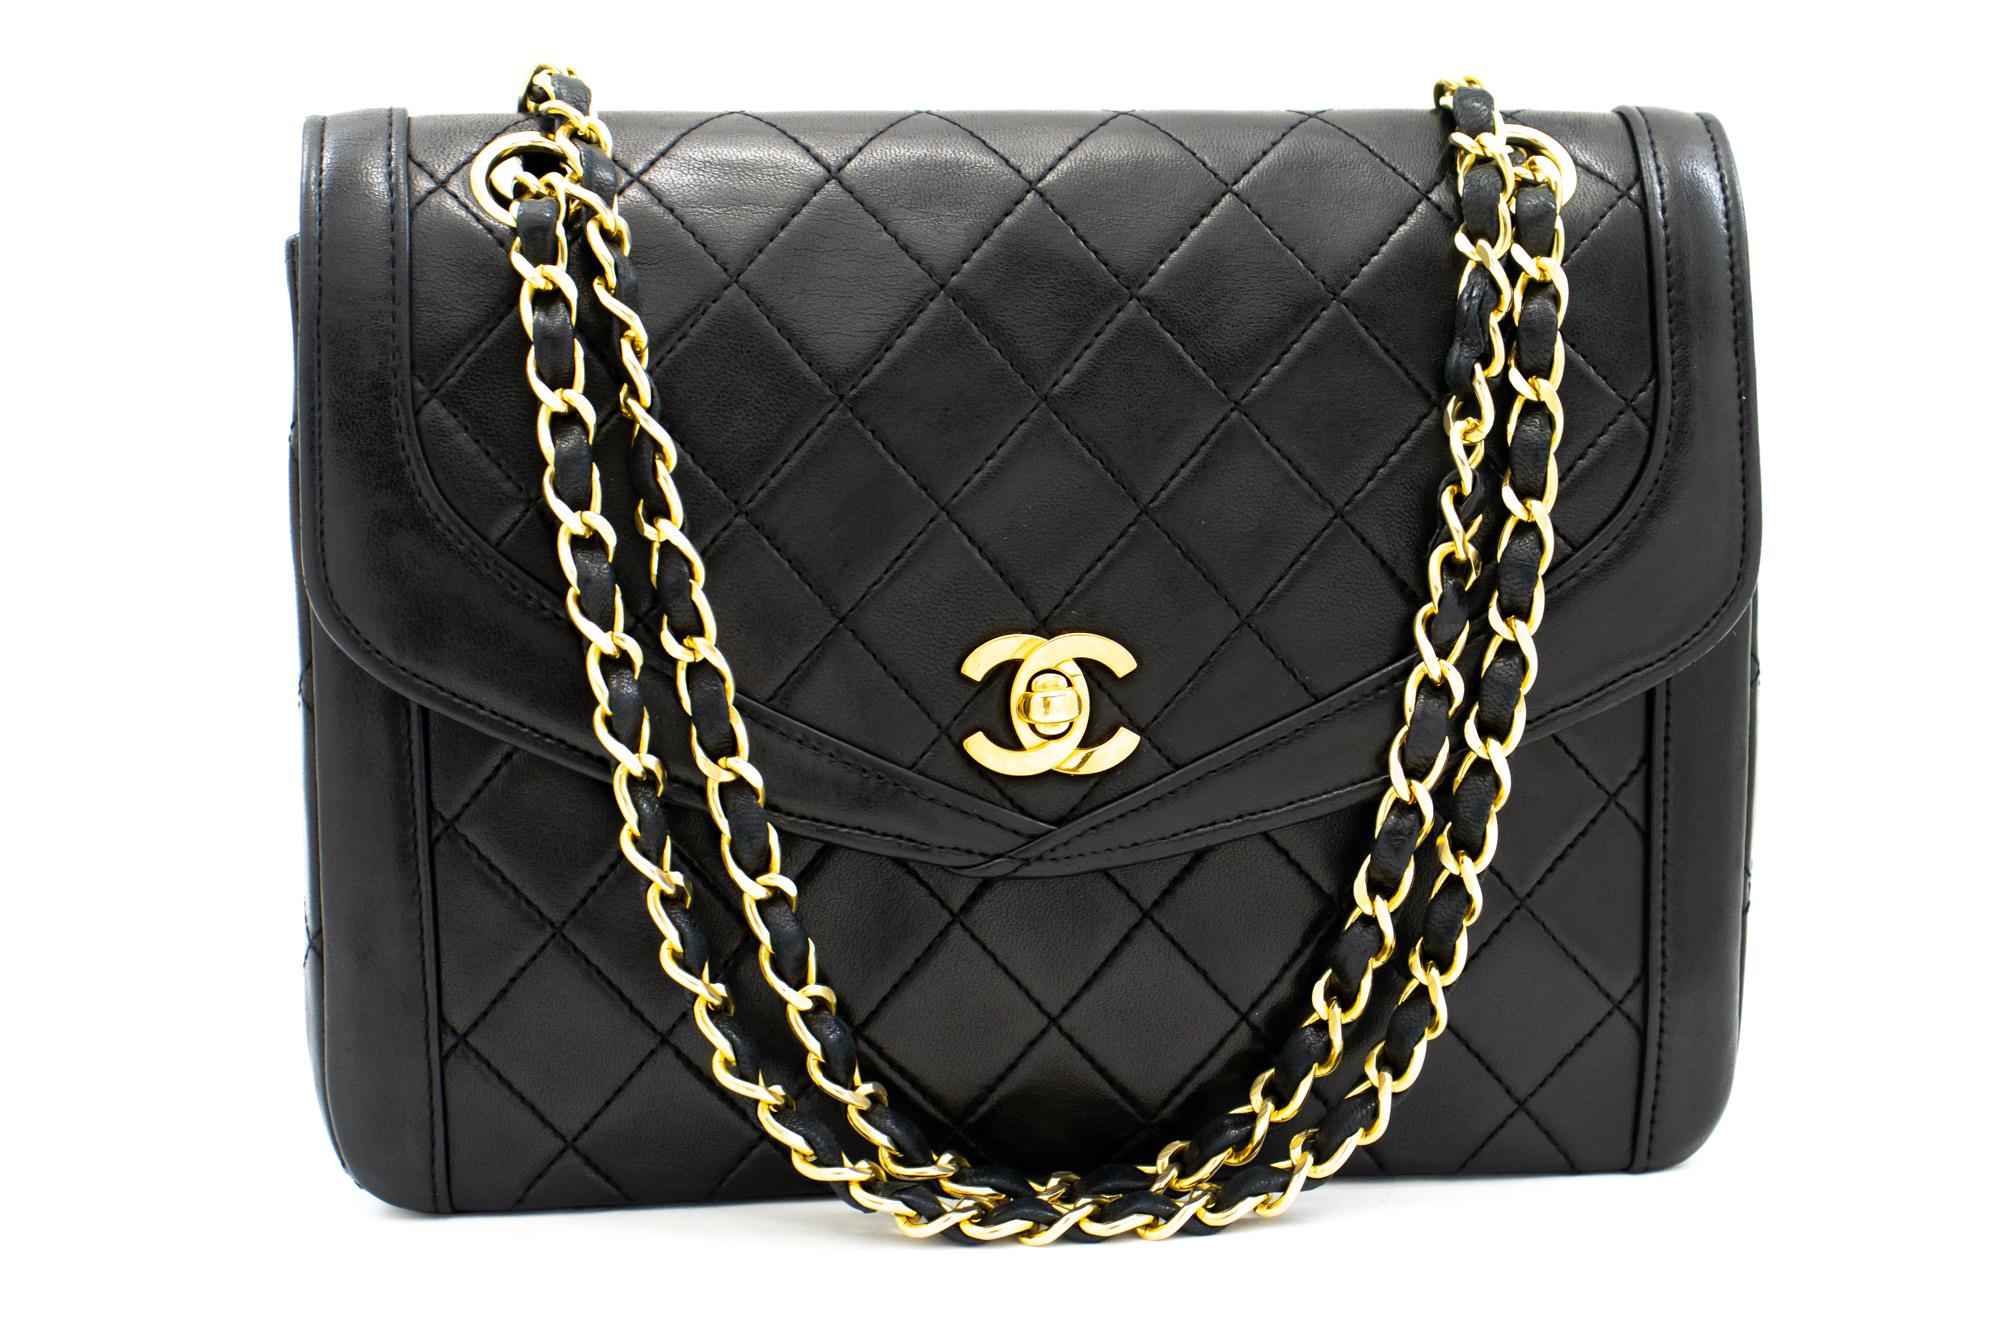 An authentic CHANEL Vintage Classic Chain Shoulder Bag Single Flap Quilted Lamb. The color is Black. The outside material is Leather. The pattern is Solid. This item is Vintage / Classic. The year of manufacture would be 1994-1996.
Conditions &